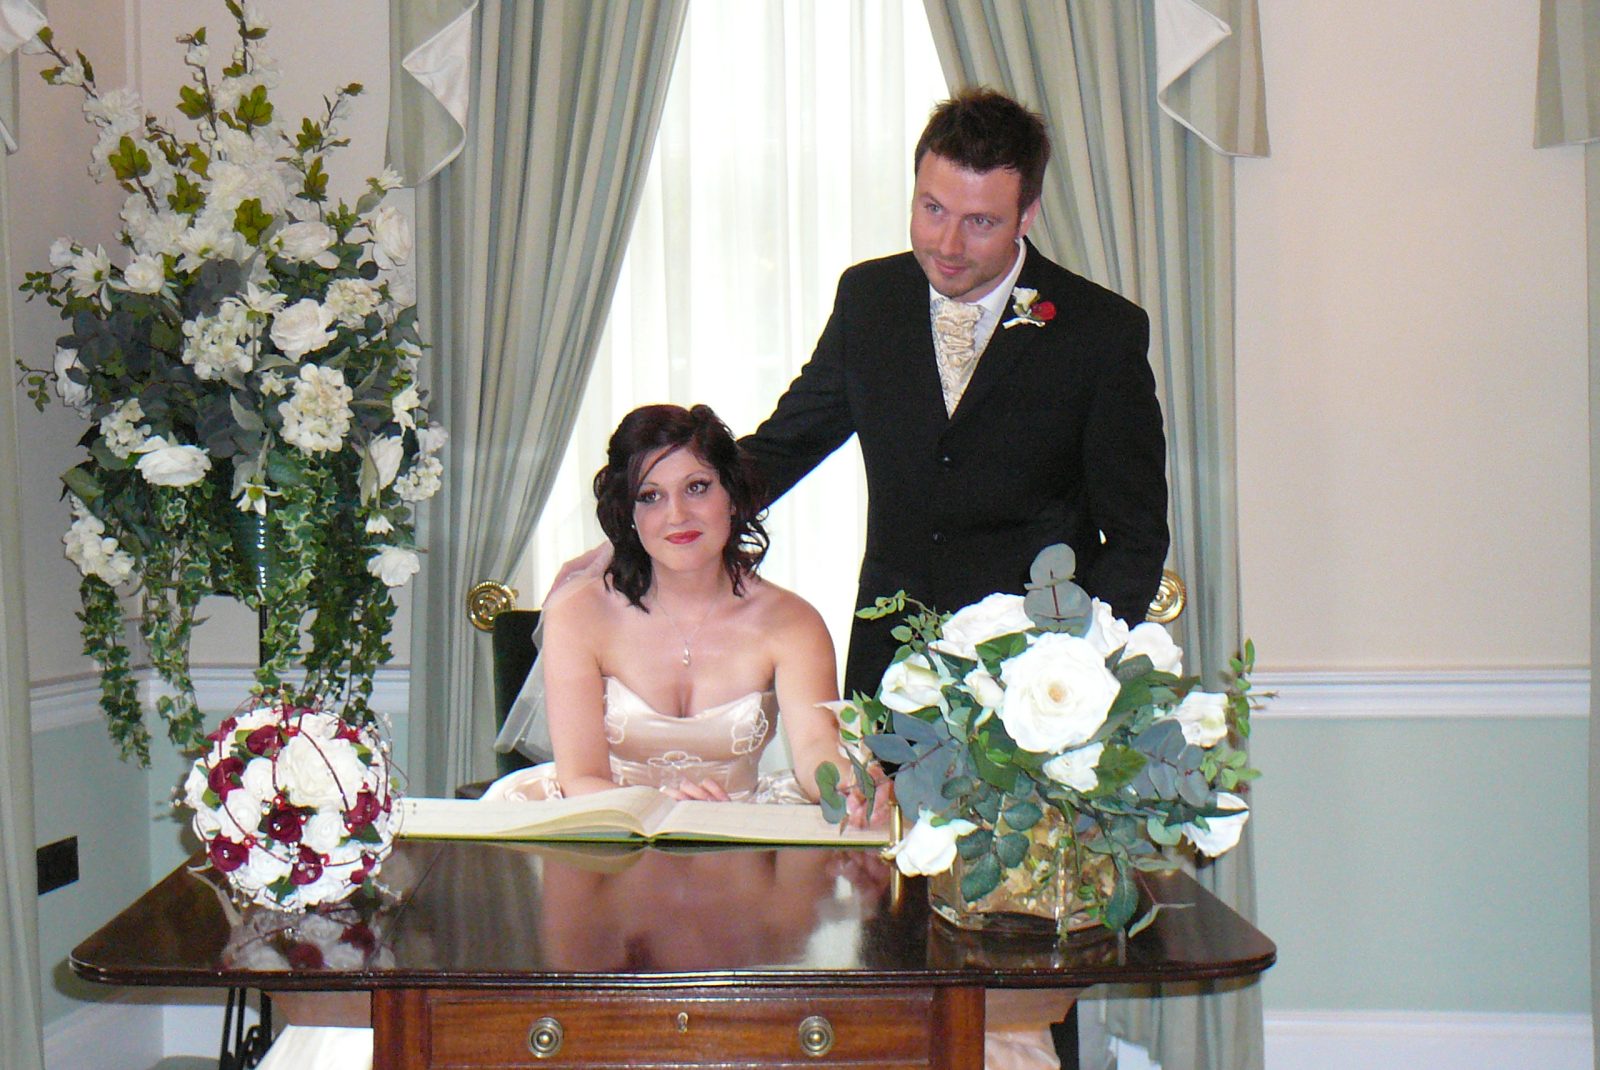 Image by JD Photograph Isle of Wight Wedding Photographer - Top picture of bride and groom signing register.